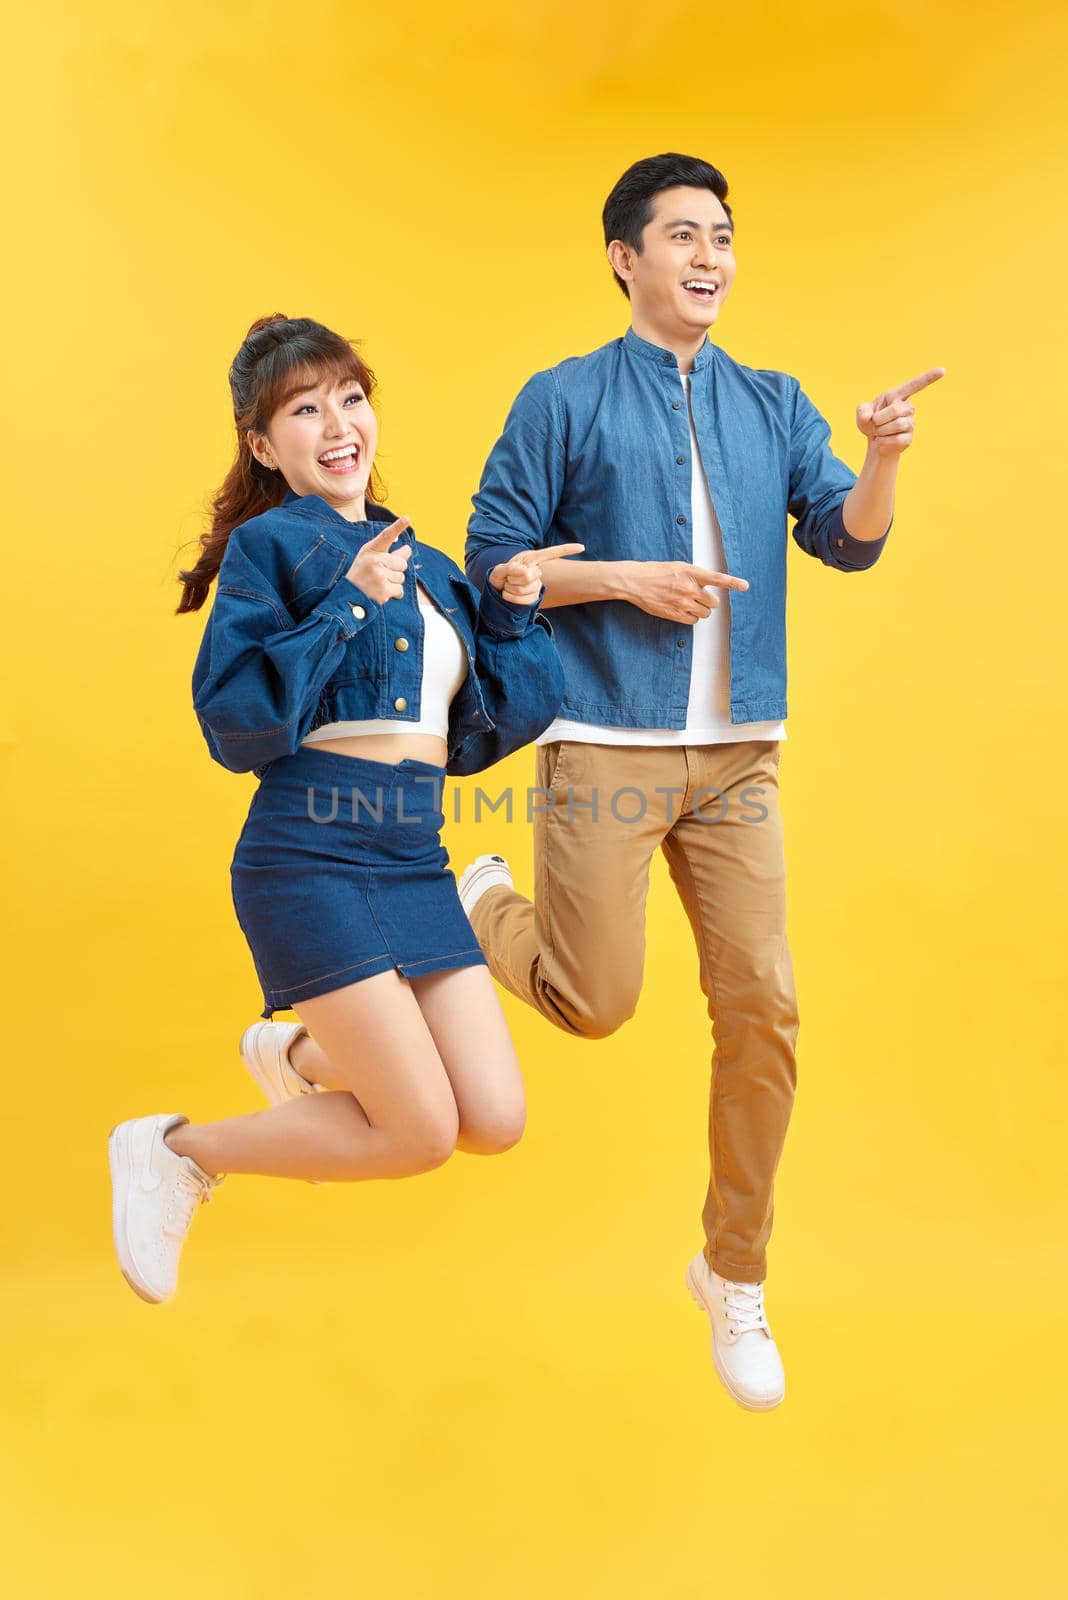 Portrait of funky couple jumping in air holding hands up enjoying time together isolated on yellow background